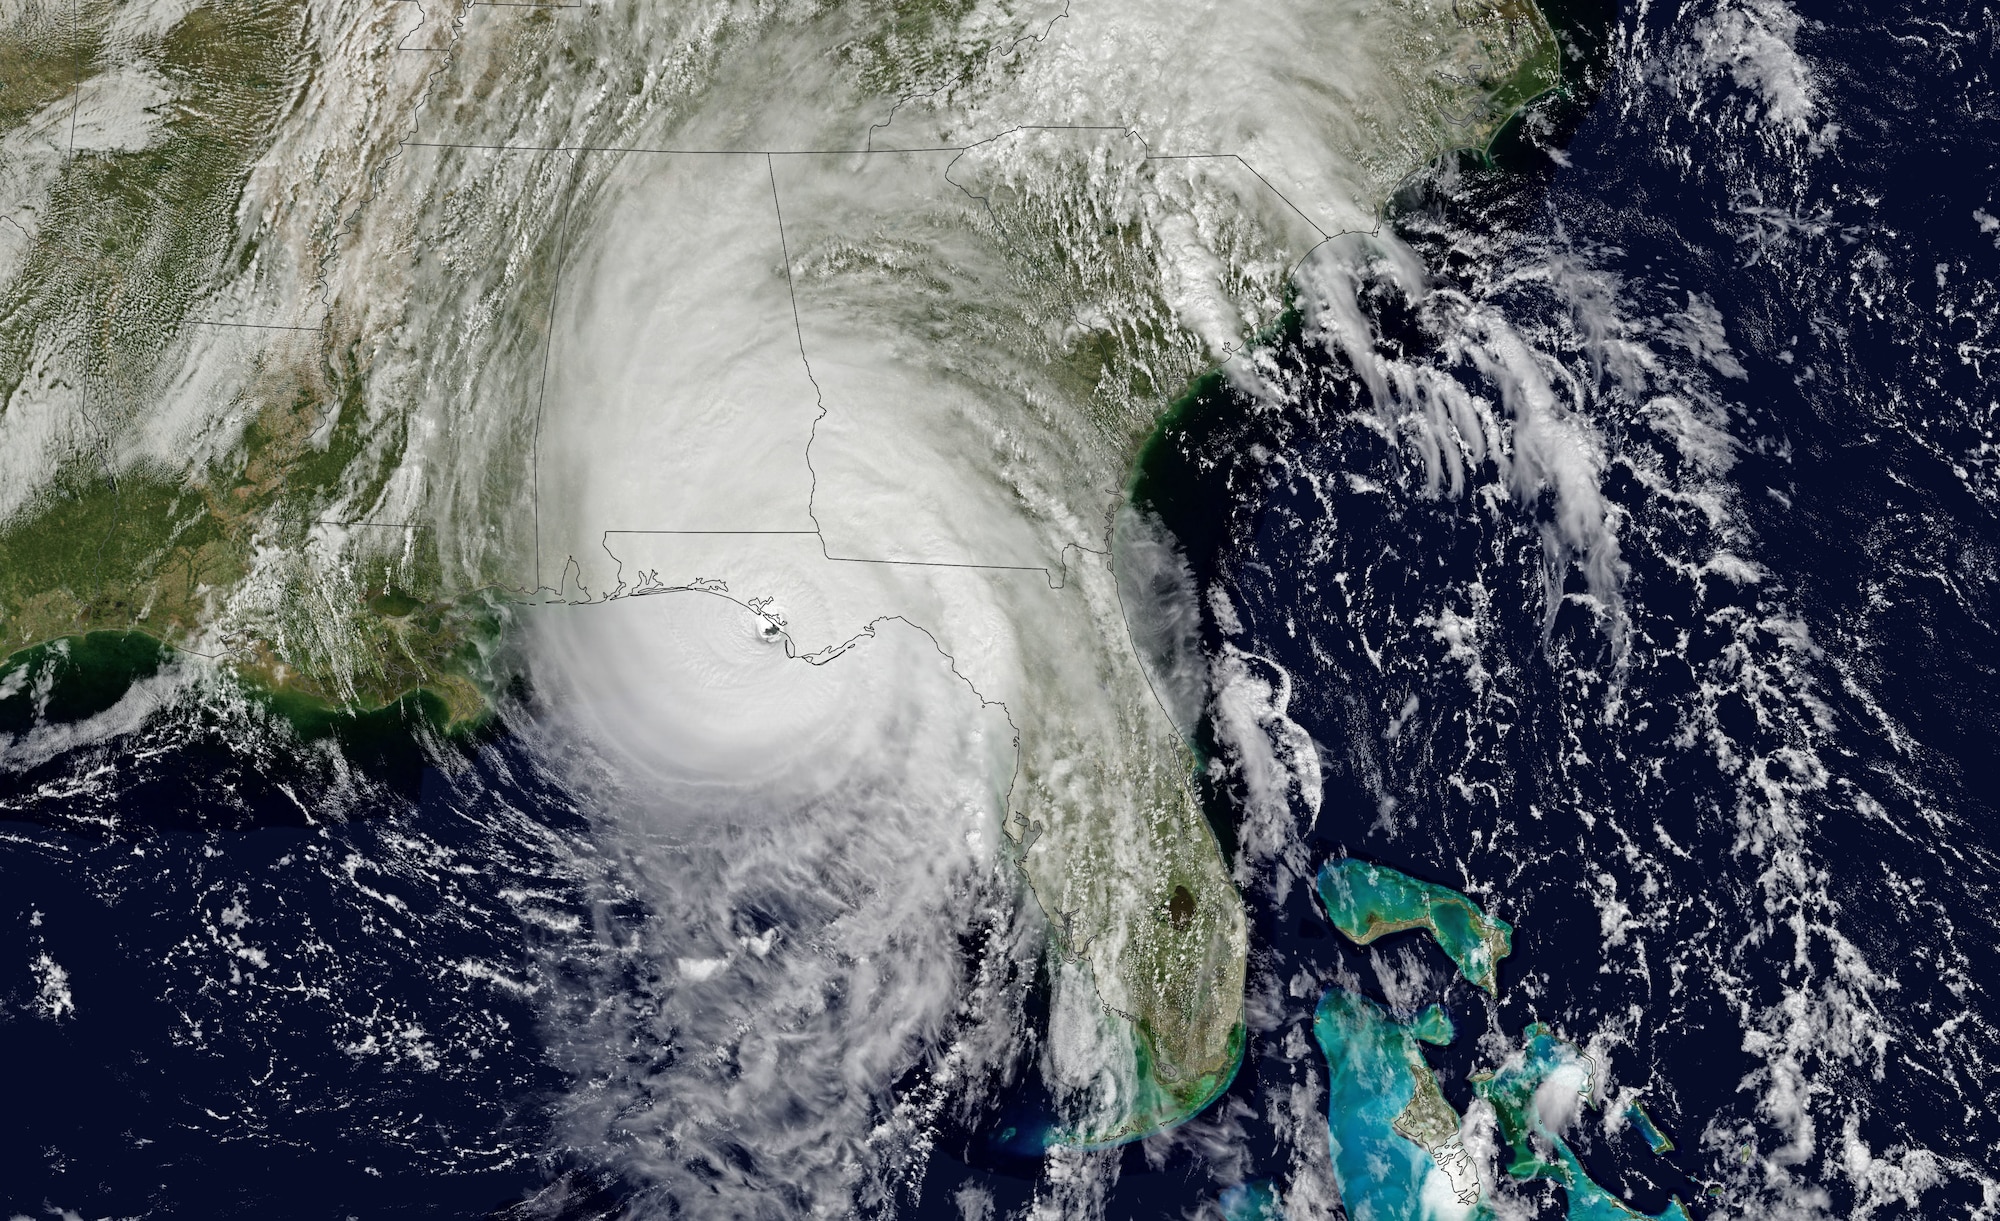 At approximately 1:30 p.m. Eastern Daylight Time (17:30 Universal Time) on October 10, 2018, Hurricane Michael made landfall near Mexico Beach, Florida. Wind speeds were estimated to be 155 miles (250 kilometers) per hour, which would make the category 4 hurricane the strongest on record to hit the Florida Panhandle. The storm has destroyed homes and knocked out electric power in the area. (NASA Earth Observatory images by Joshua Stevens)